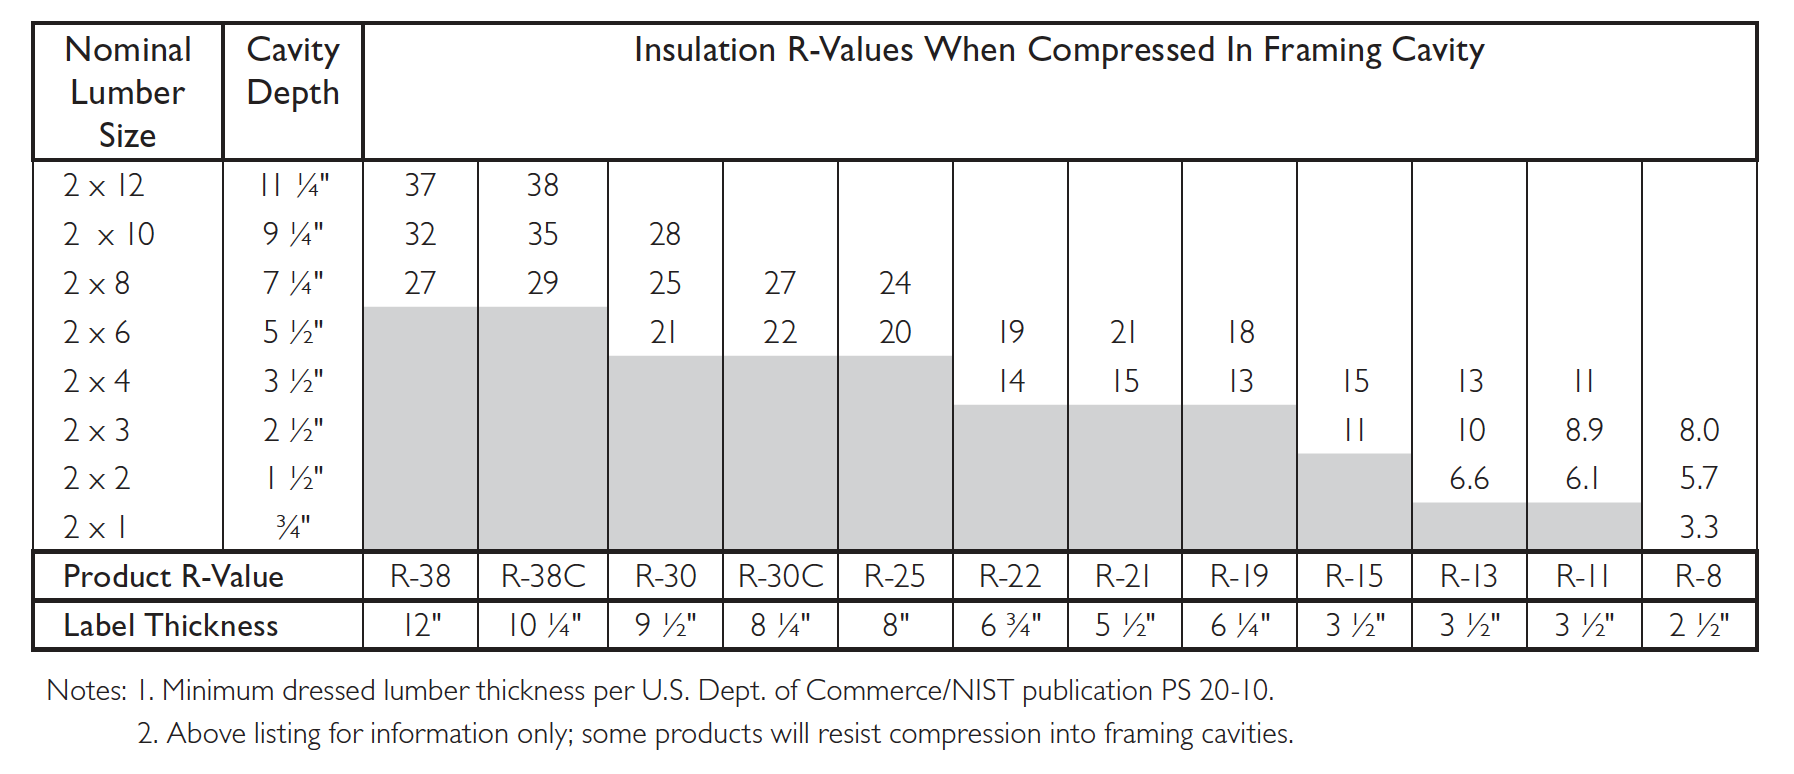 owens-corning-compressed-fiberglass-insulation-r-value-chart.png